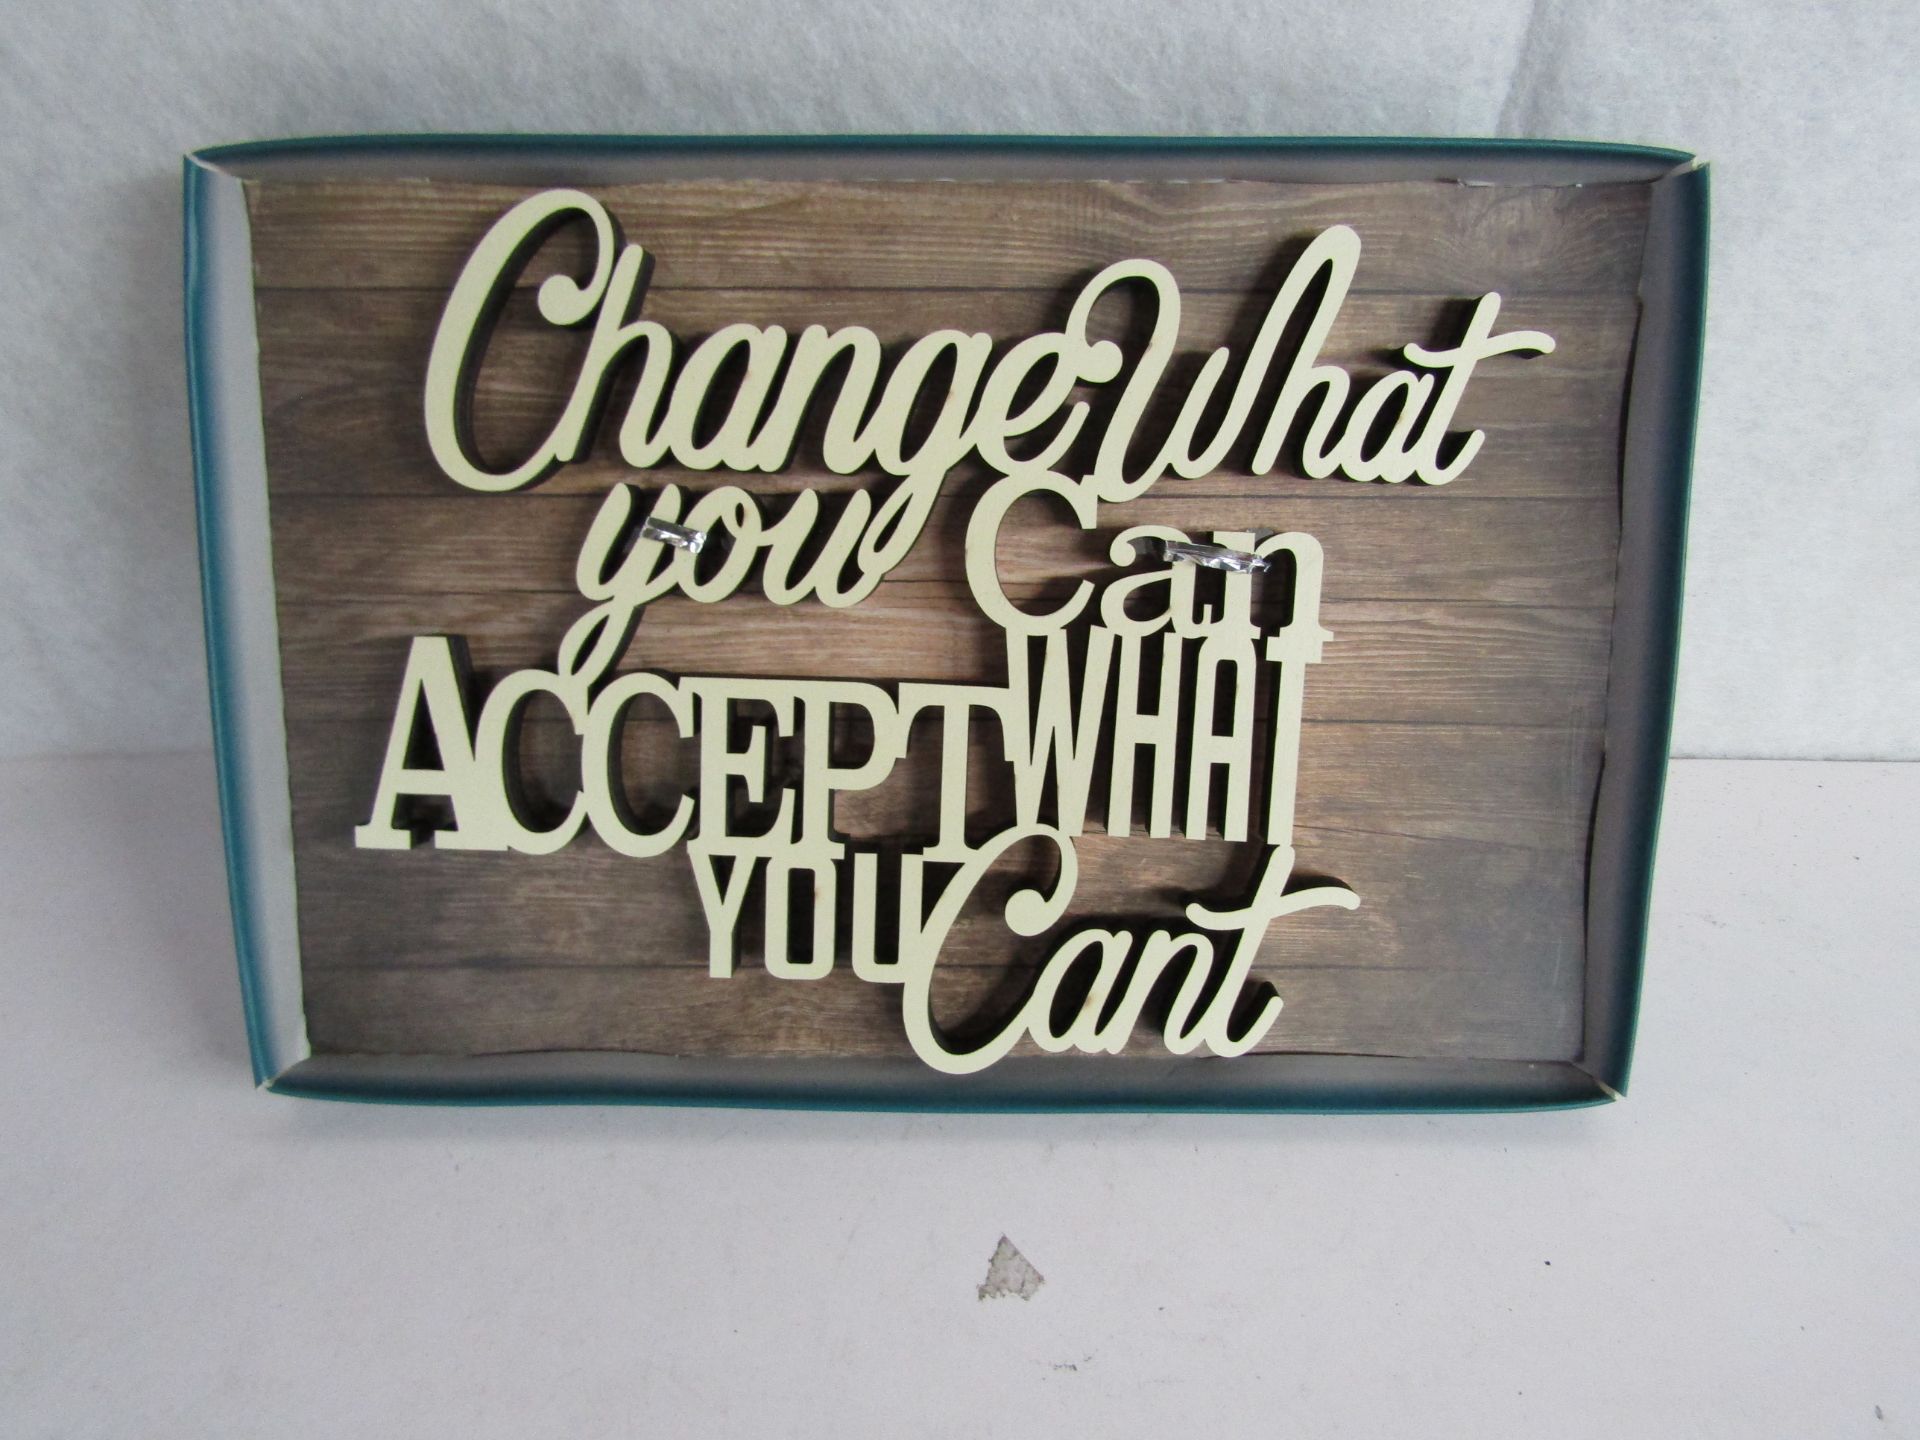 12x " Change What You Can Accept What You Cant " Wooden Wall Signs - New & Boxed.